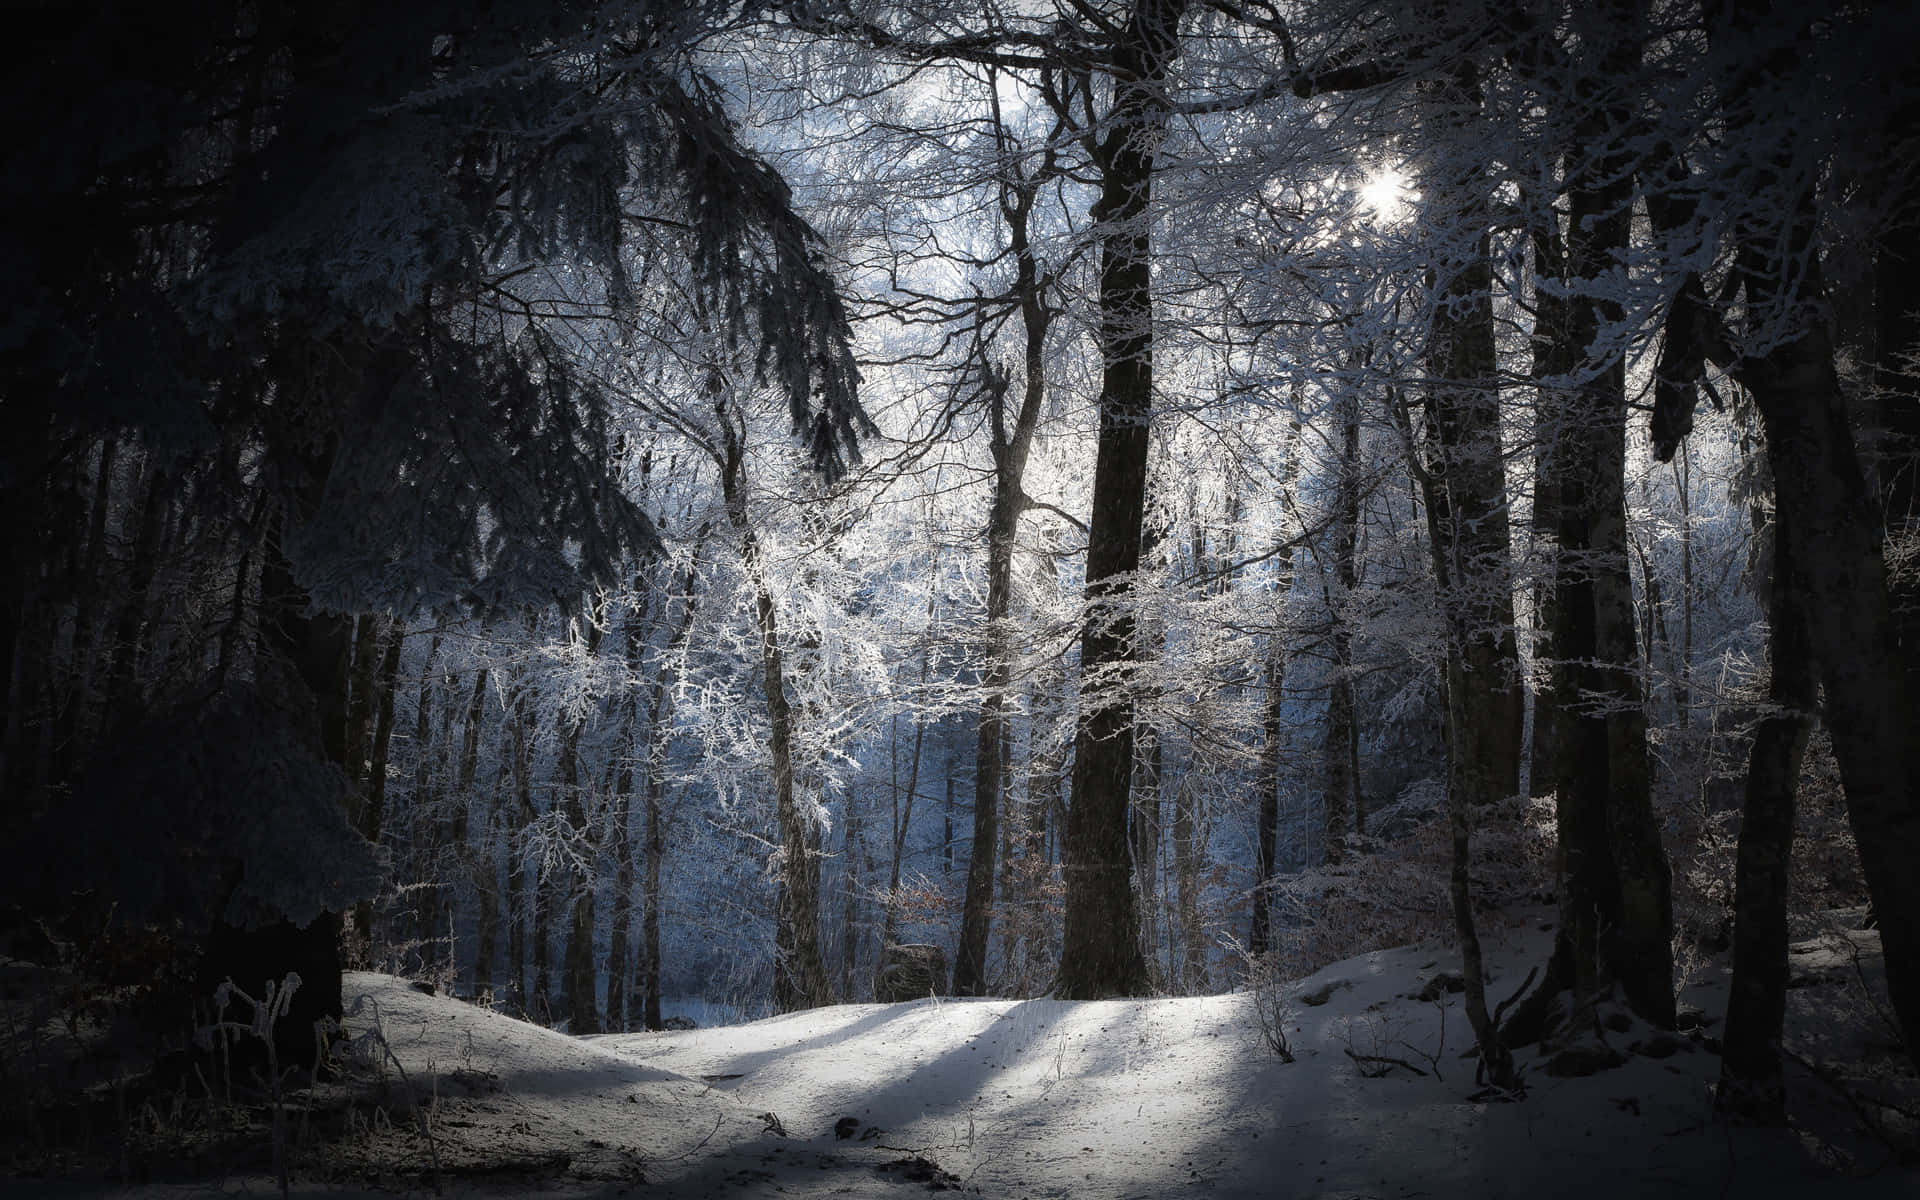 "Explore the Stillness of the Winter Forest"